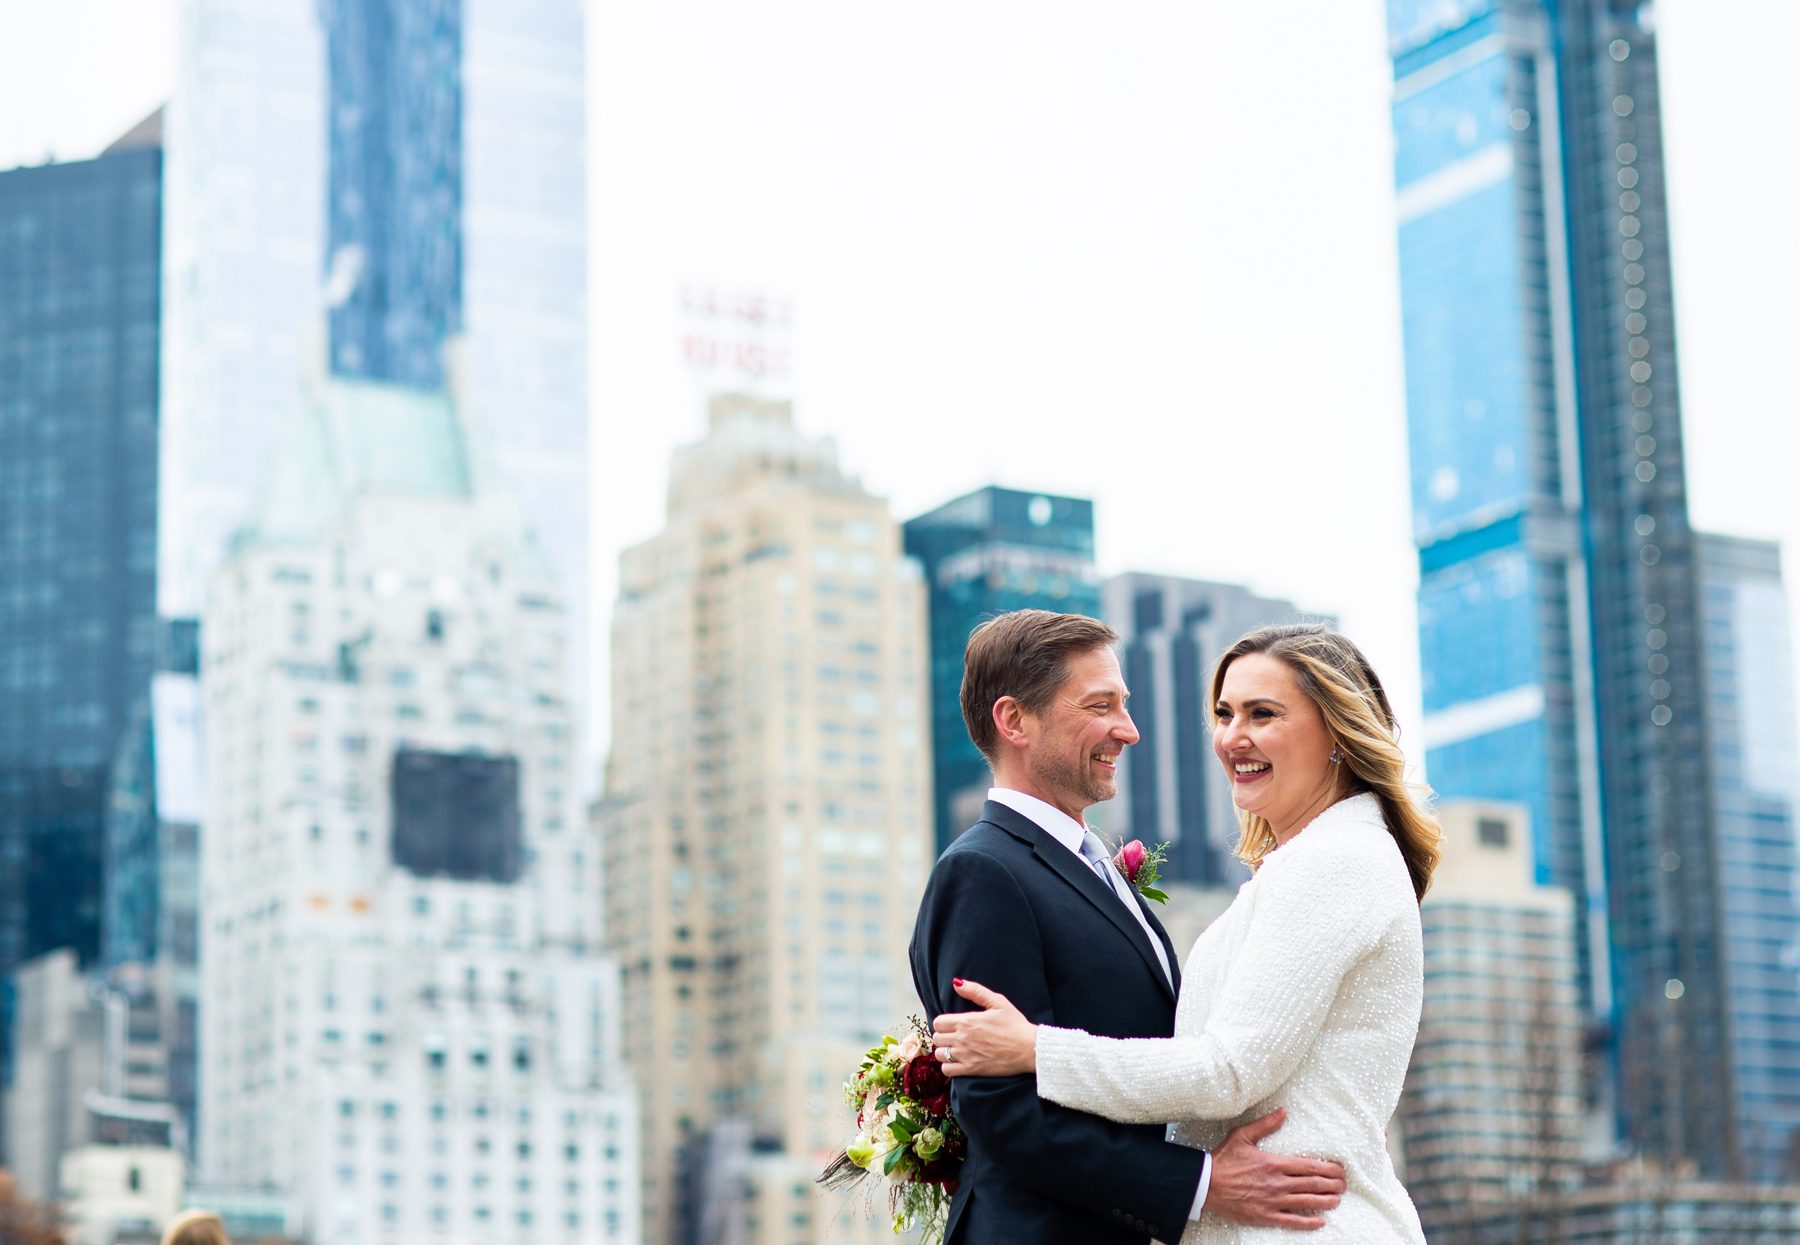 Winter Elopement in Central Park 